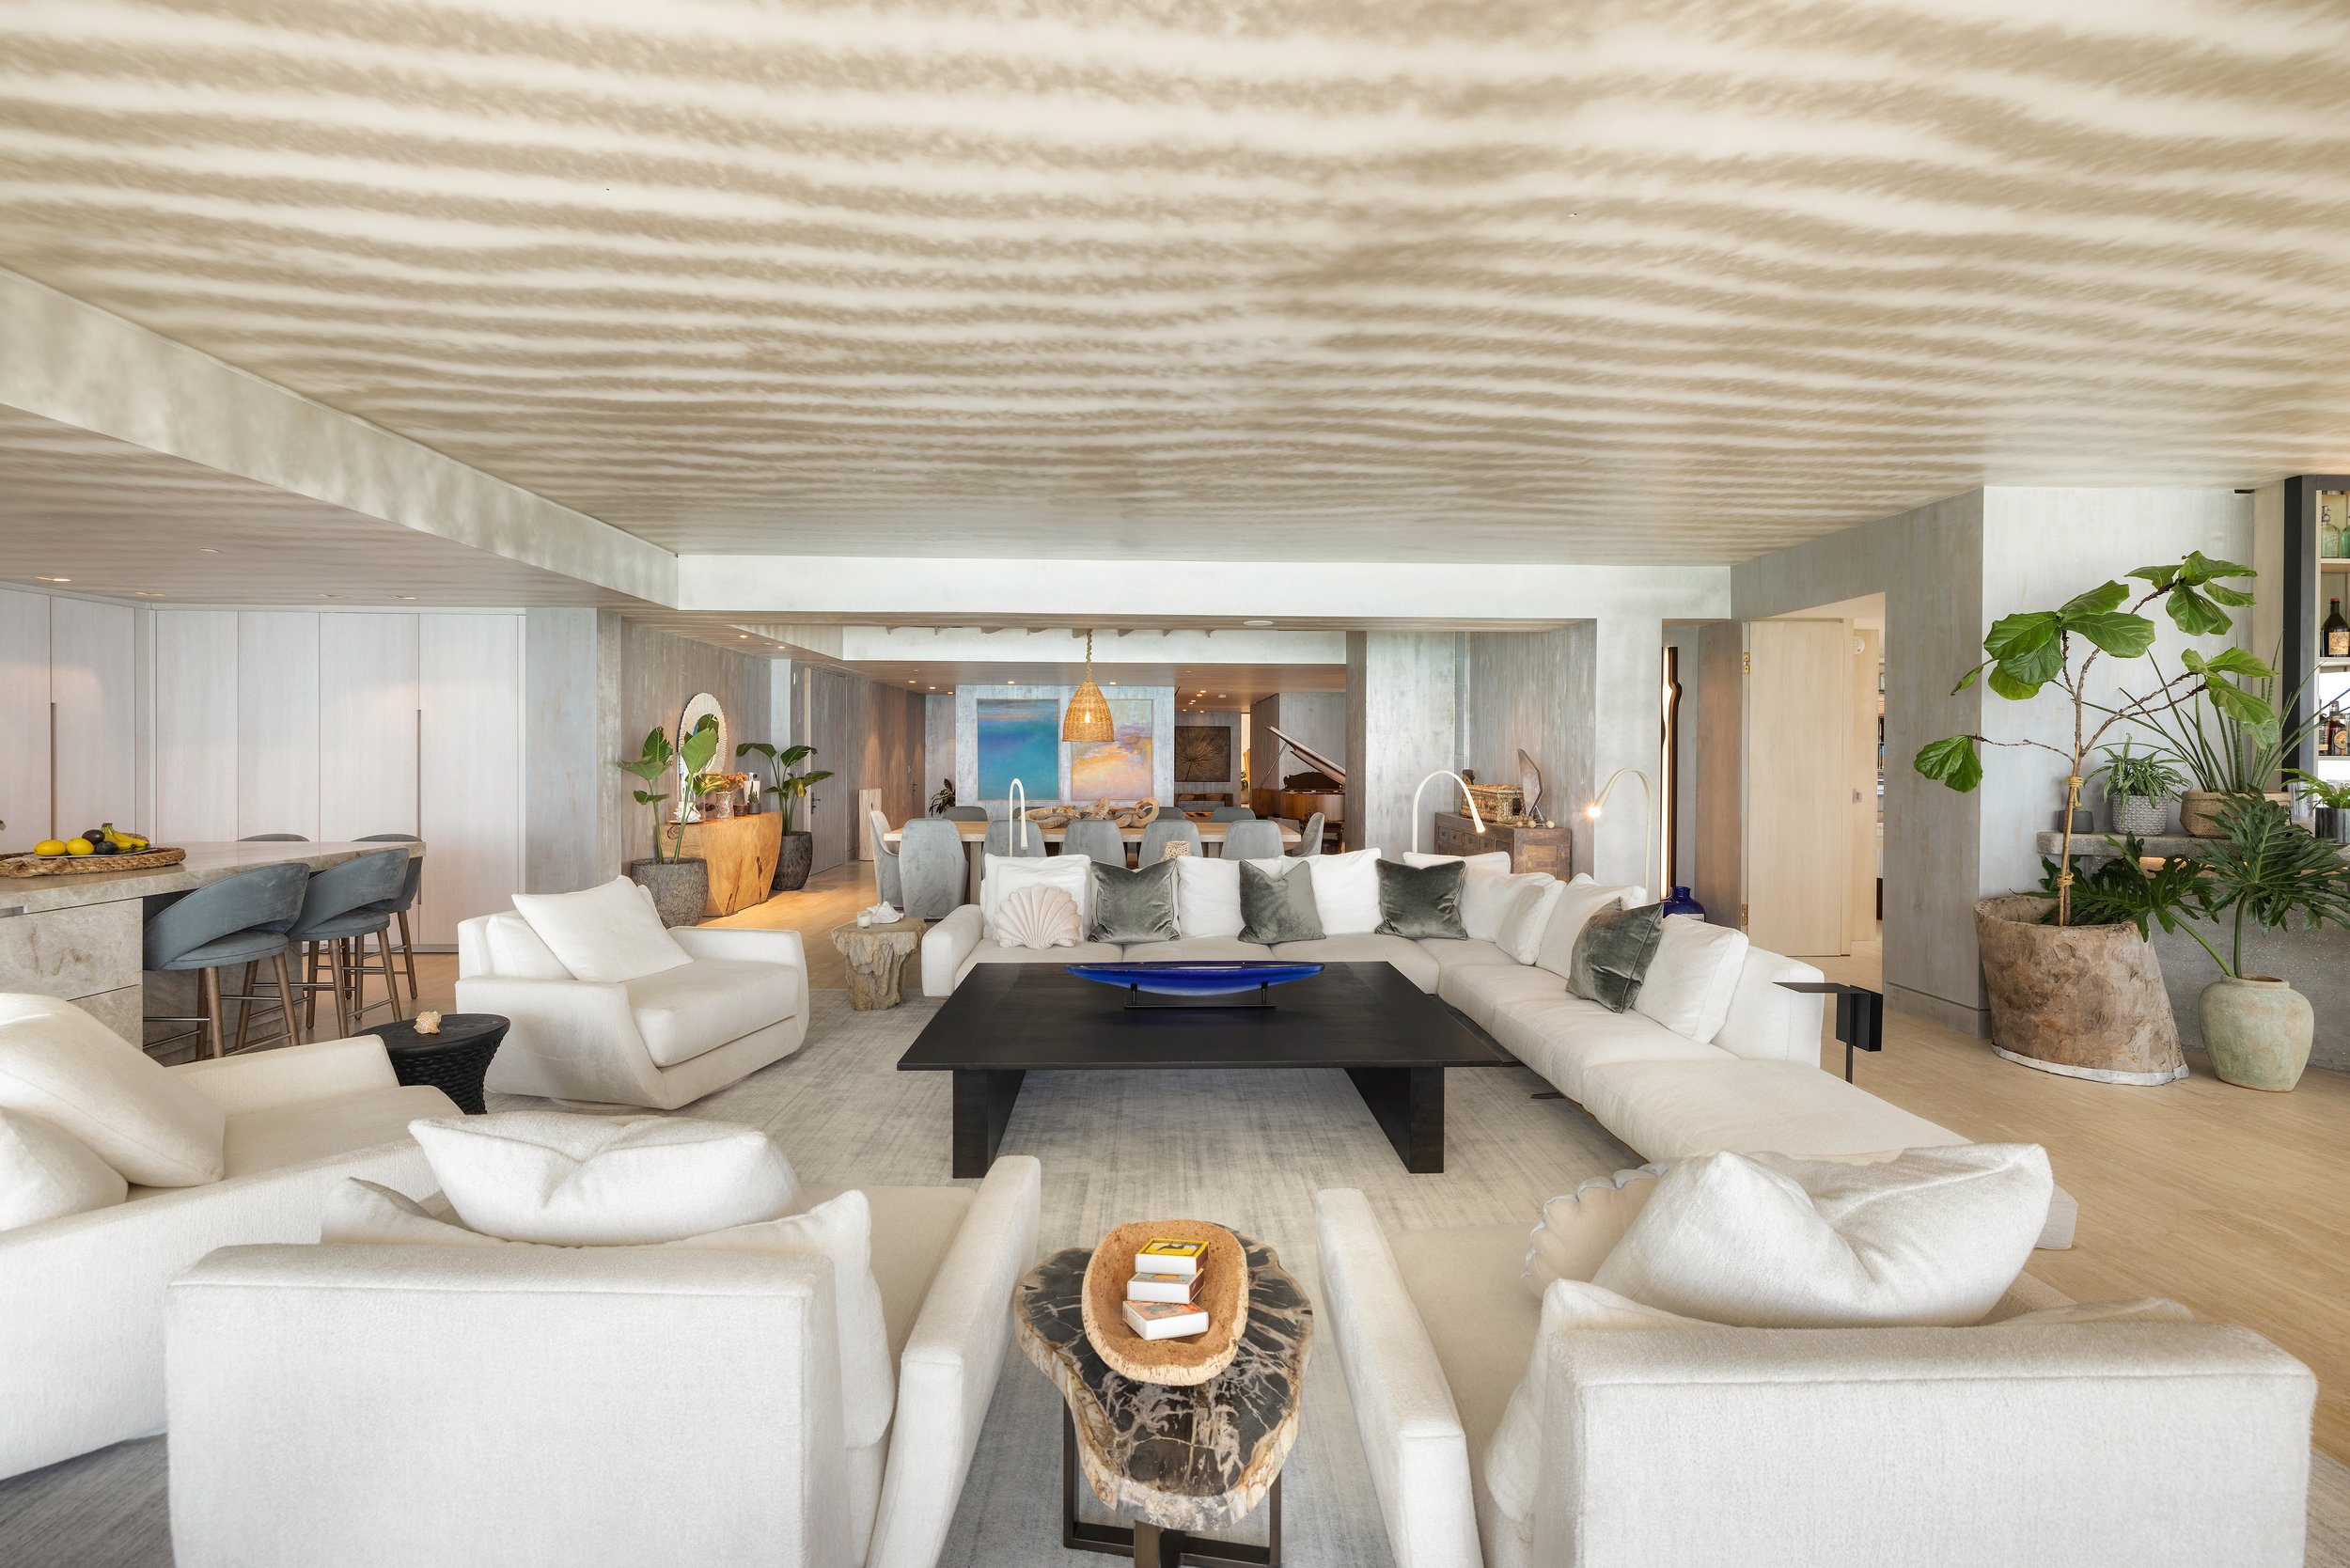 Check Out This Lavish Condo With Custom Wave Ceilings Asking $37 Million At Four Seasons at The Surf Club In Surfside 11.jpg